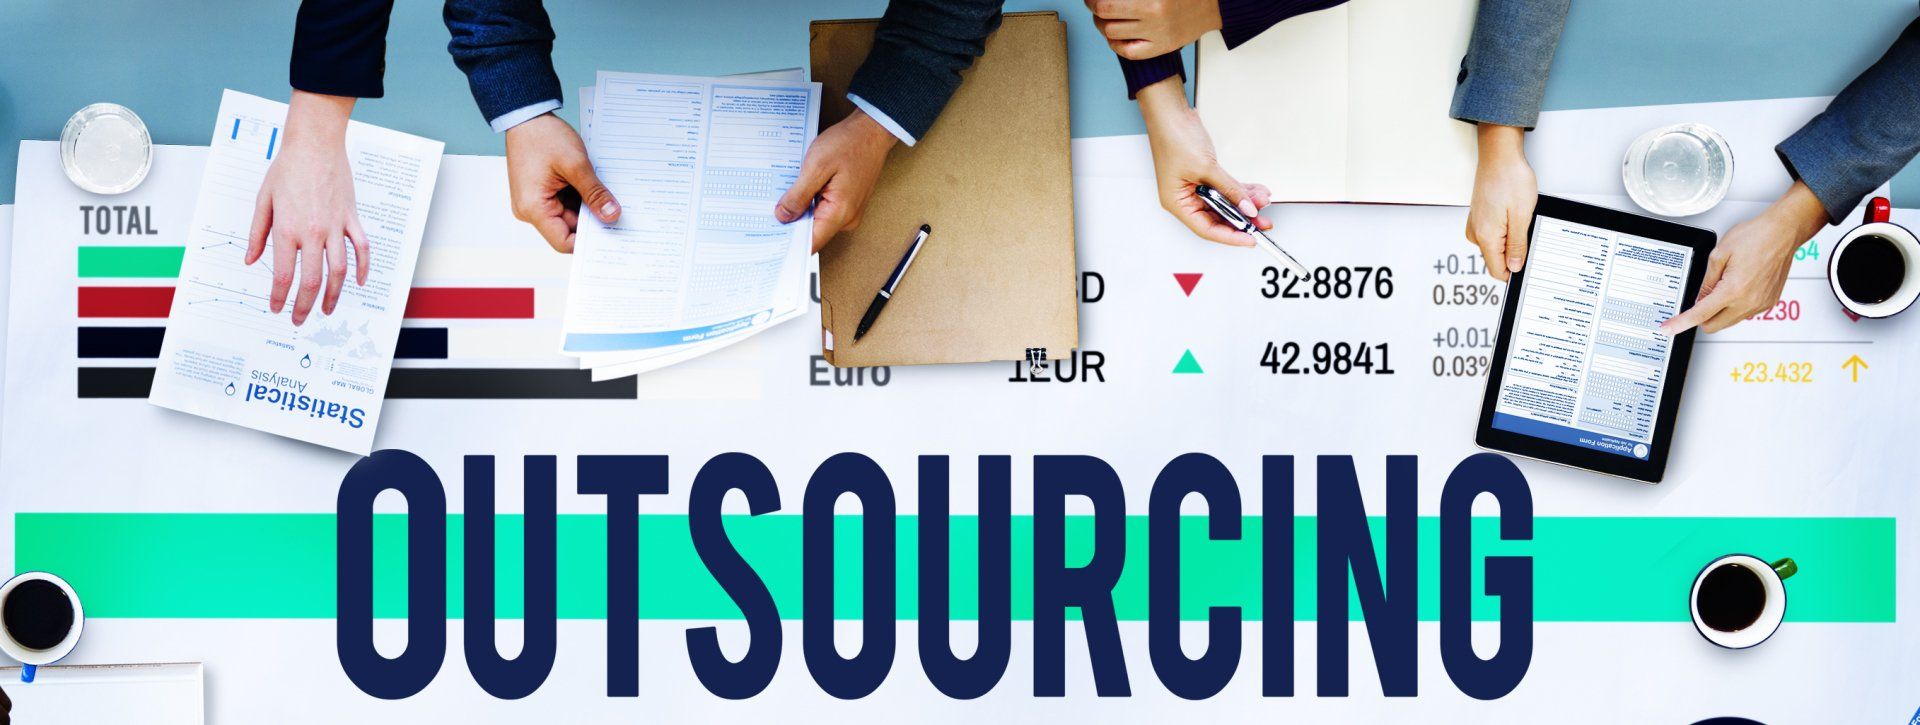 Illustration of Outsourcing